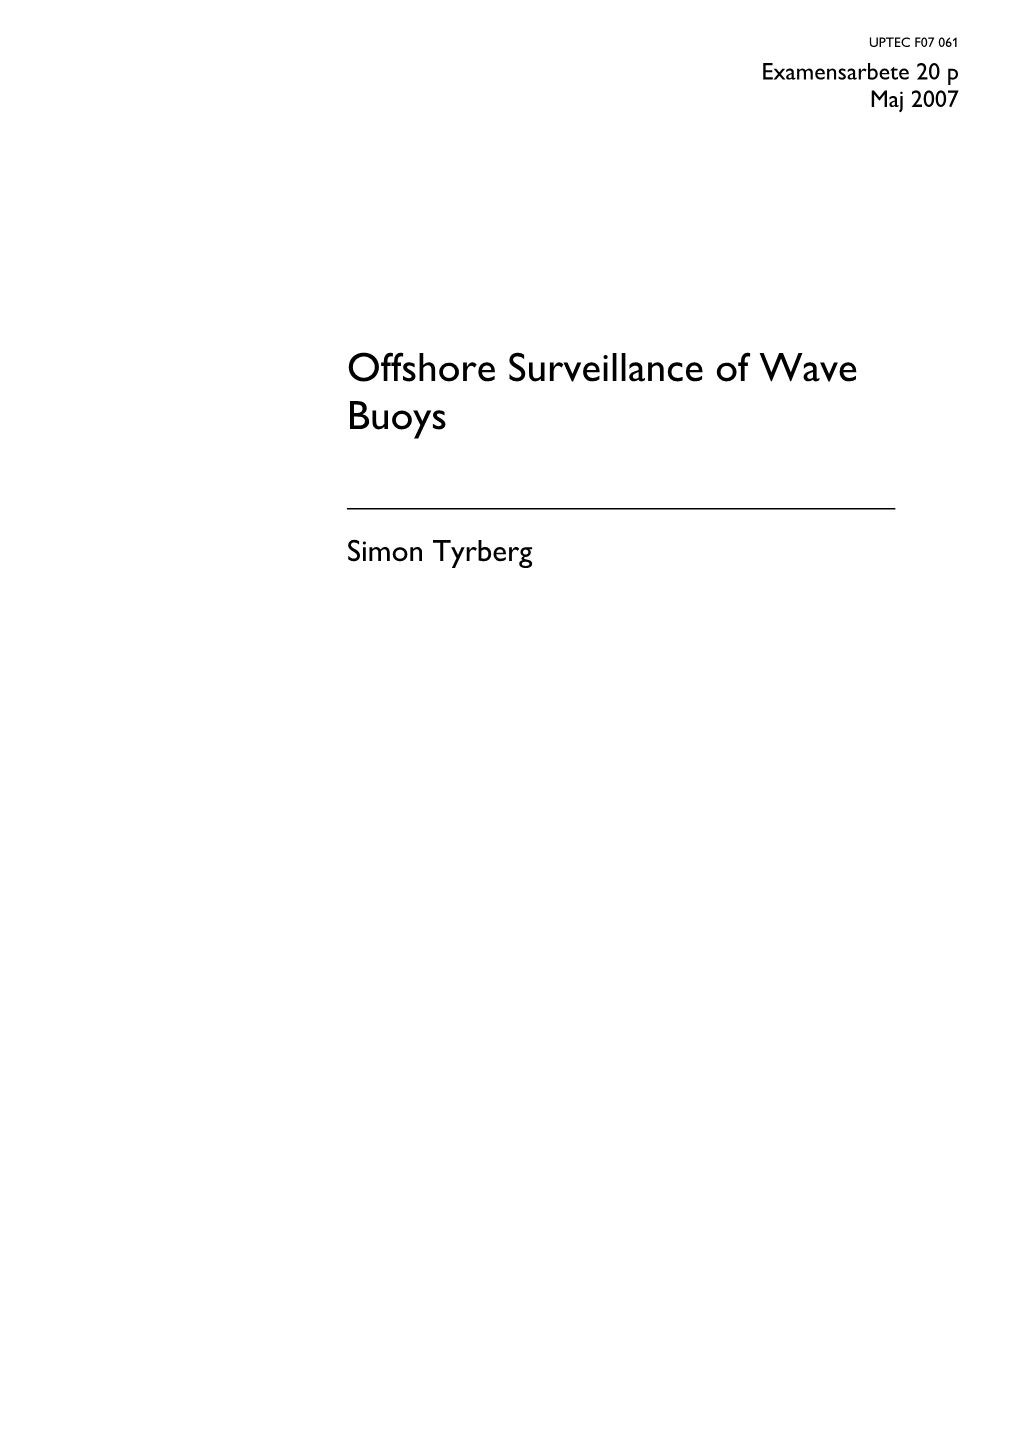 Offshore Surveillance of Wave Buoys